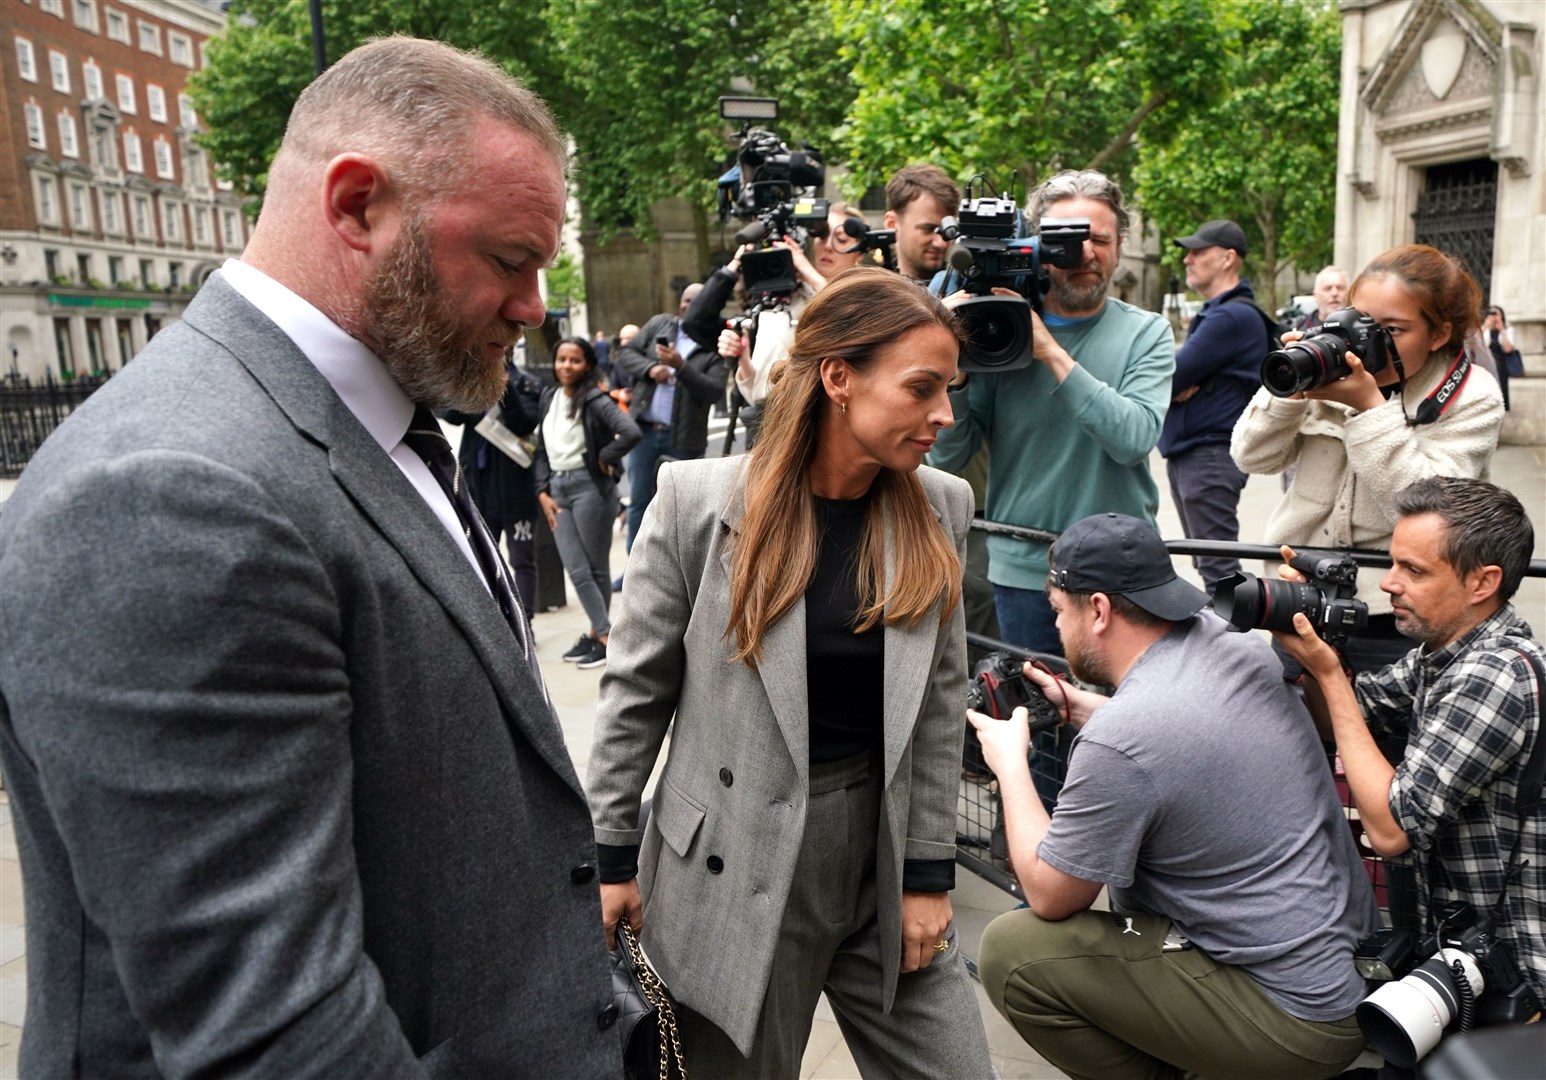 Wayne and Coleen Rooney arrive at the Royal Courts Of Justice of the libel battle between Rebekah Vardy and Coleen Rooney (Yui Mok/PA)